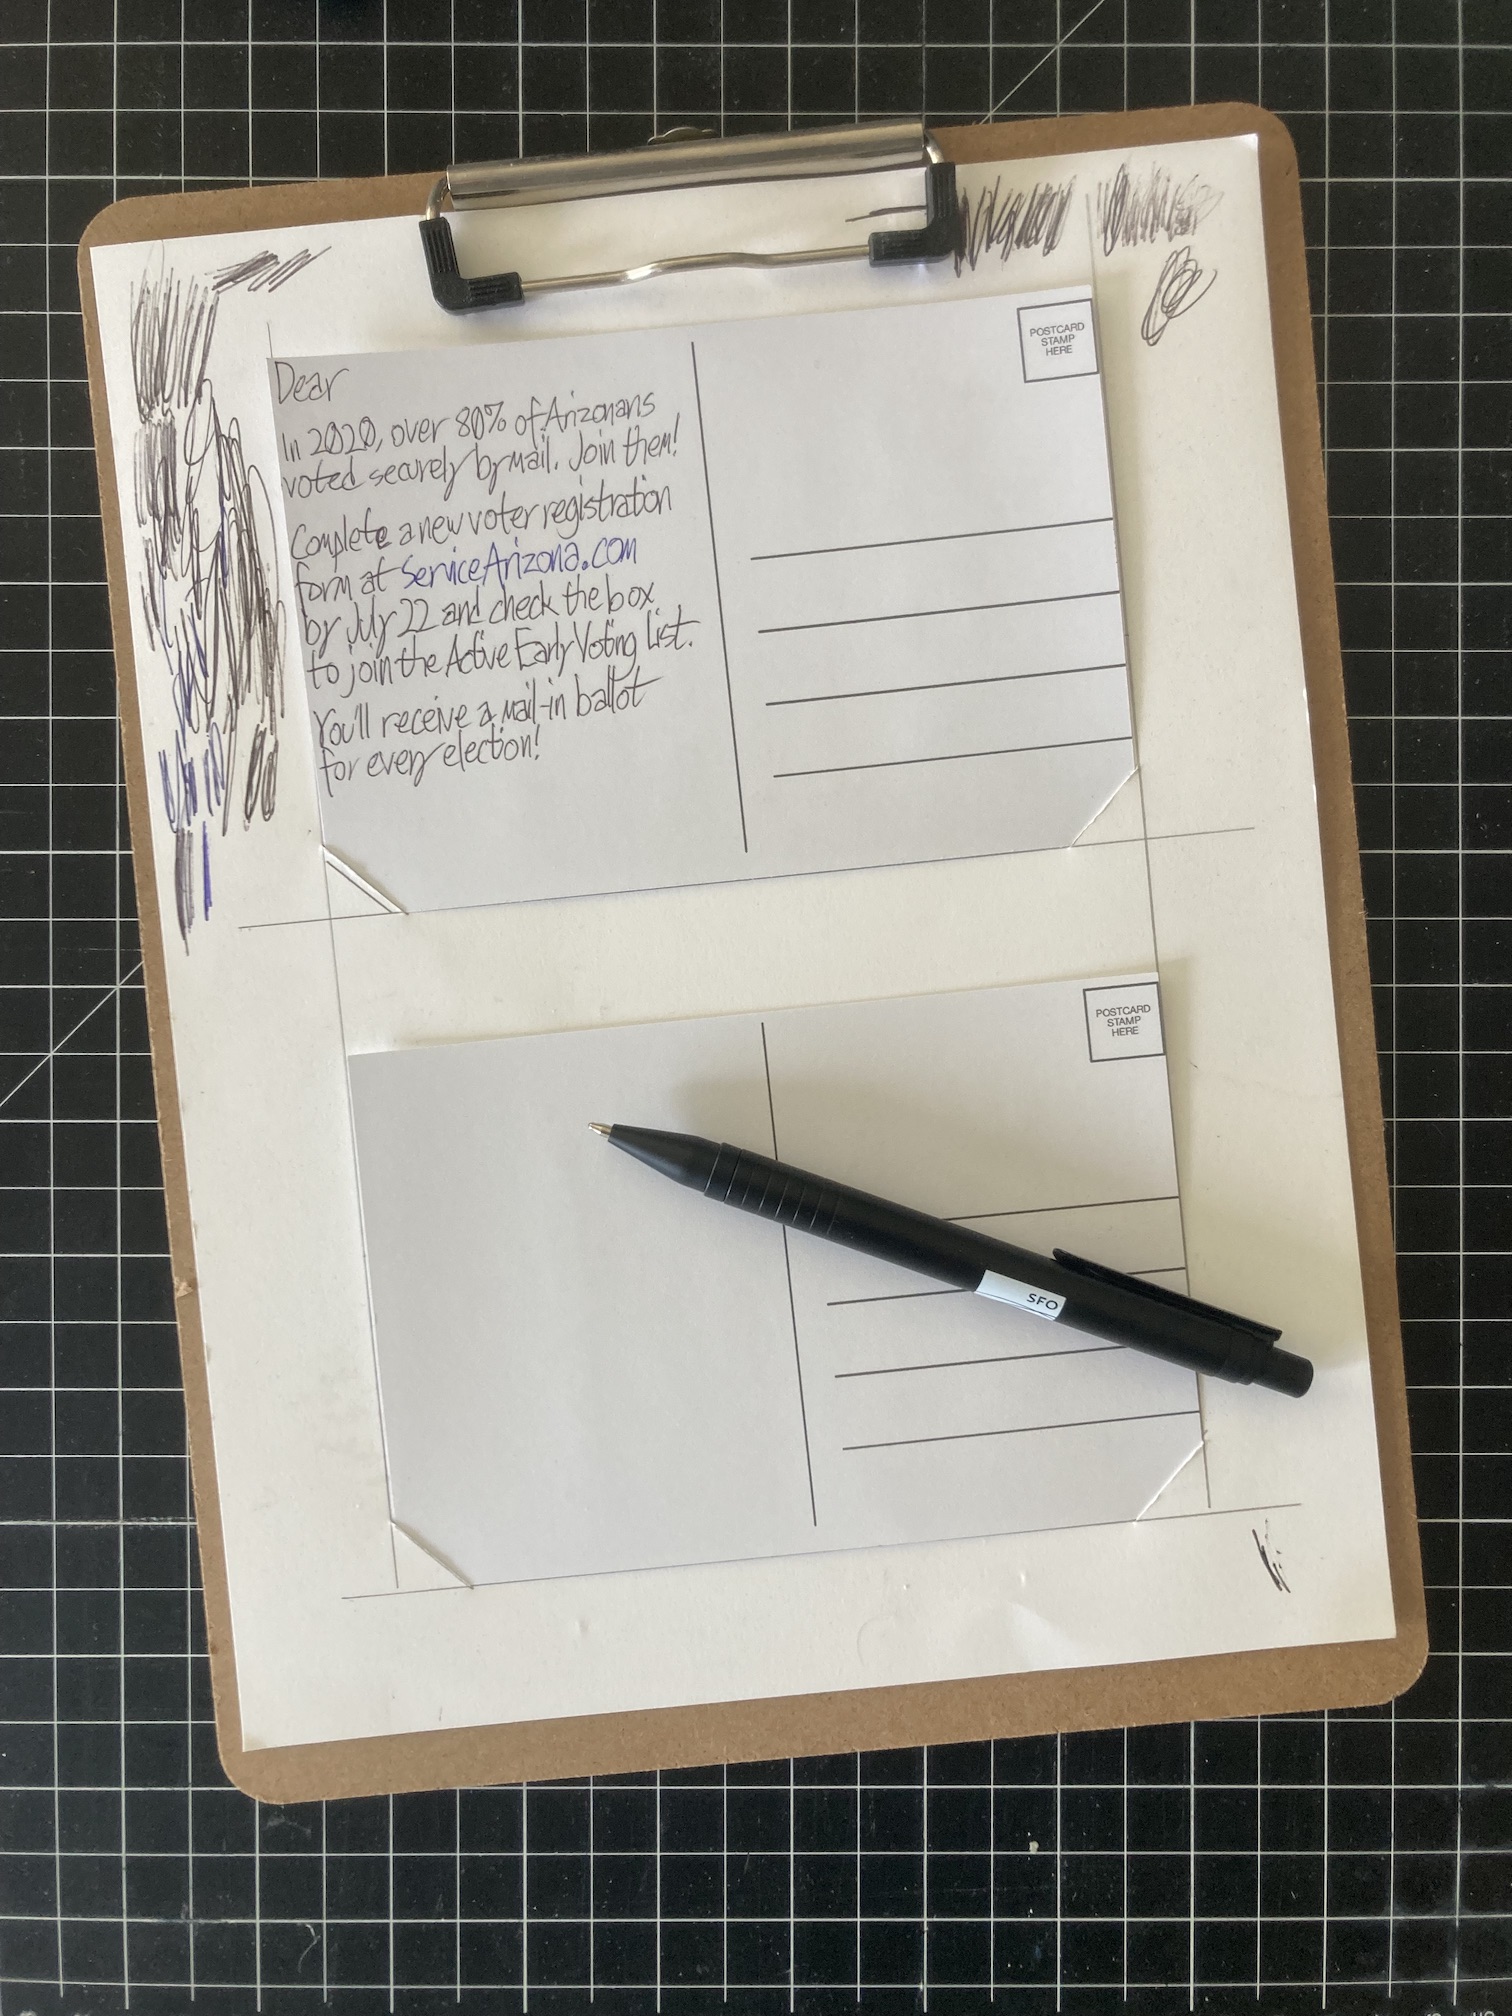 A clipboard holding one postcard holder sheet, with a postcard in each space. Each postcard is back-side-up. The upper postcard has a script written in its left half, while the lower postcard is blank. The perimeter of the sheet is filled with scribbles made to get dried-up pens flowing again.